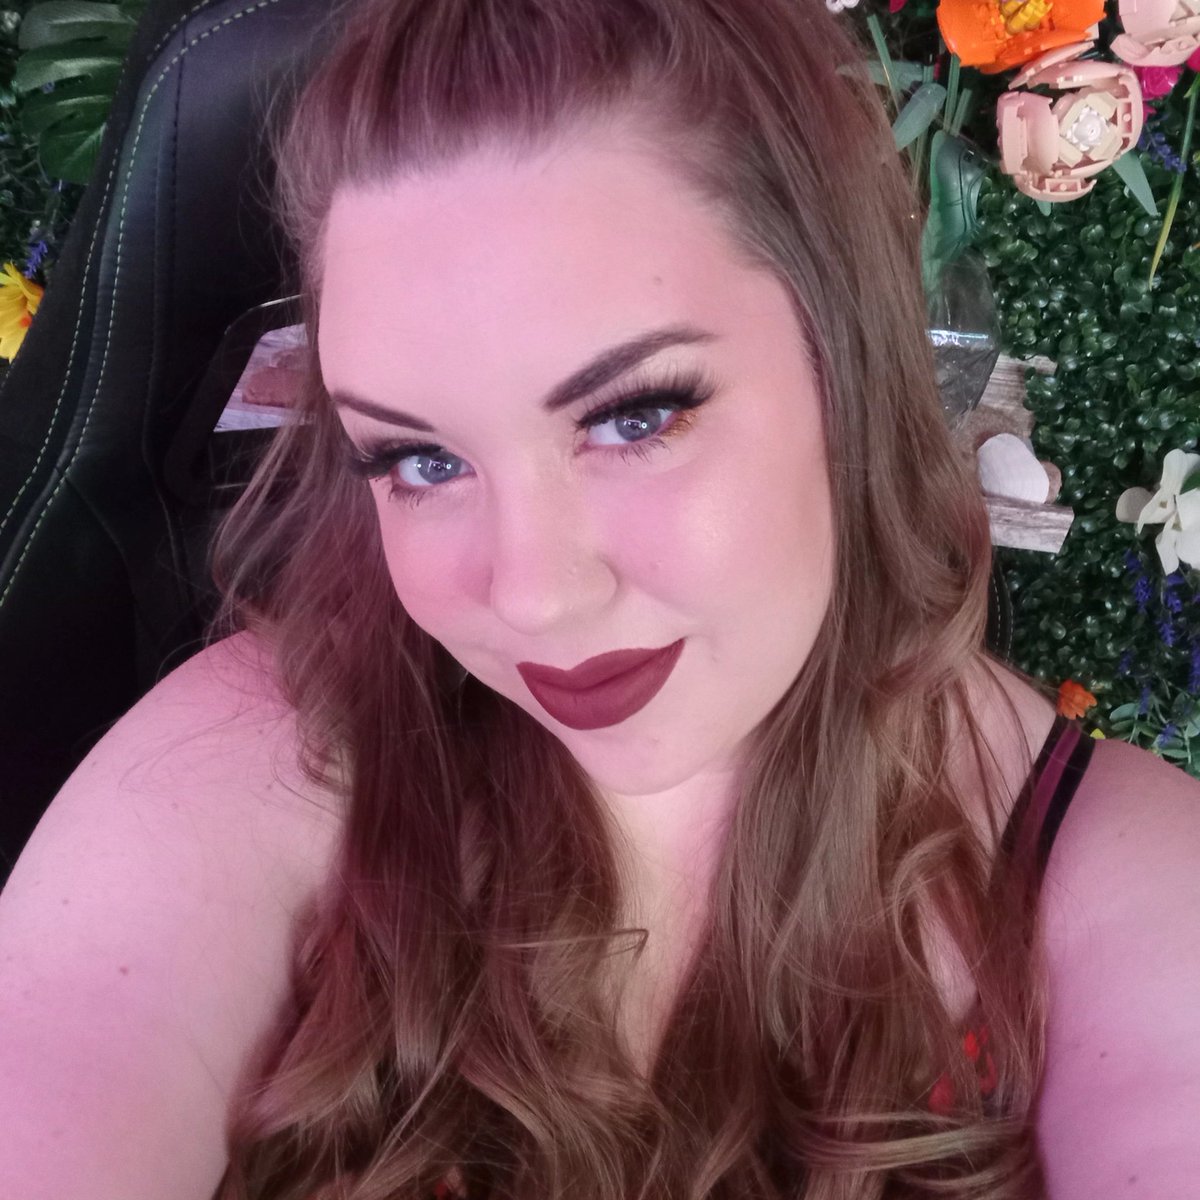 🥳Playing DBD today! 👖💨Yeet your pants and grab a drink!🤩 🌺Live right now on twitch.tv/brittars🌺 #deadbydaylight #deadbydaylightsurvivor #behaviour #playingwithviewers #twitchgirl #varietystreamer #twitch #twitchstreamer #makeuplook #nowlive #comehang #selfie